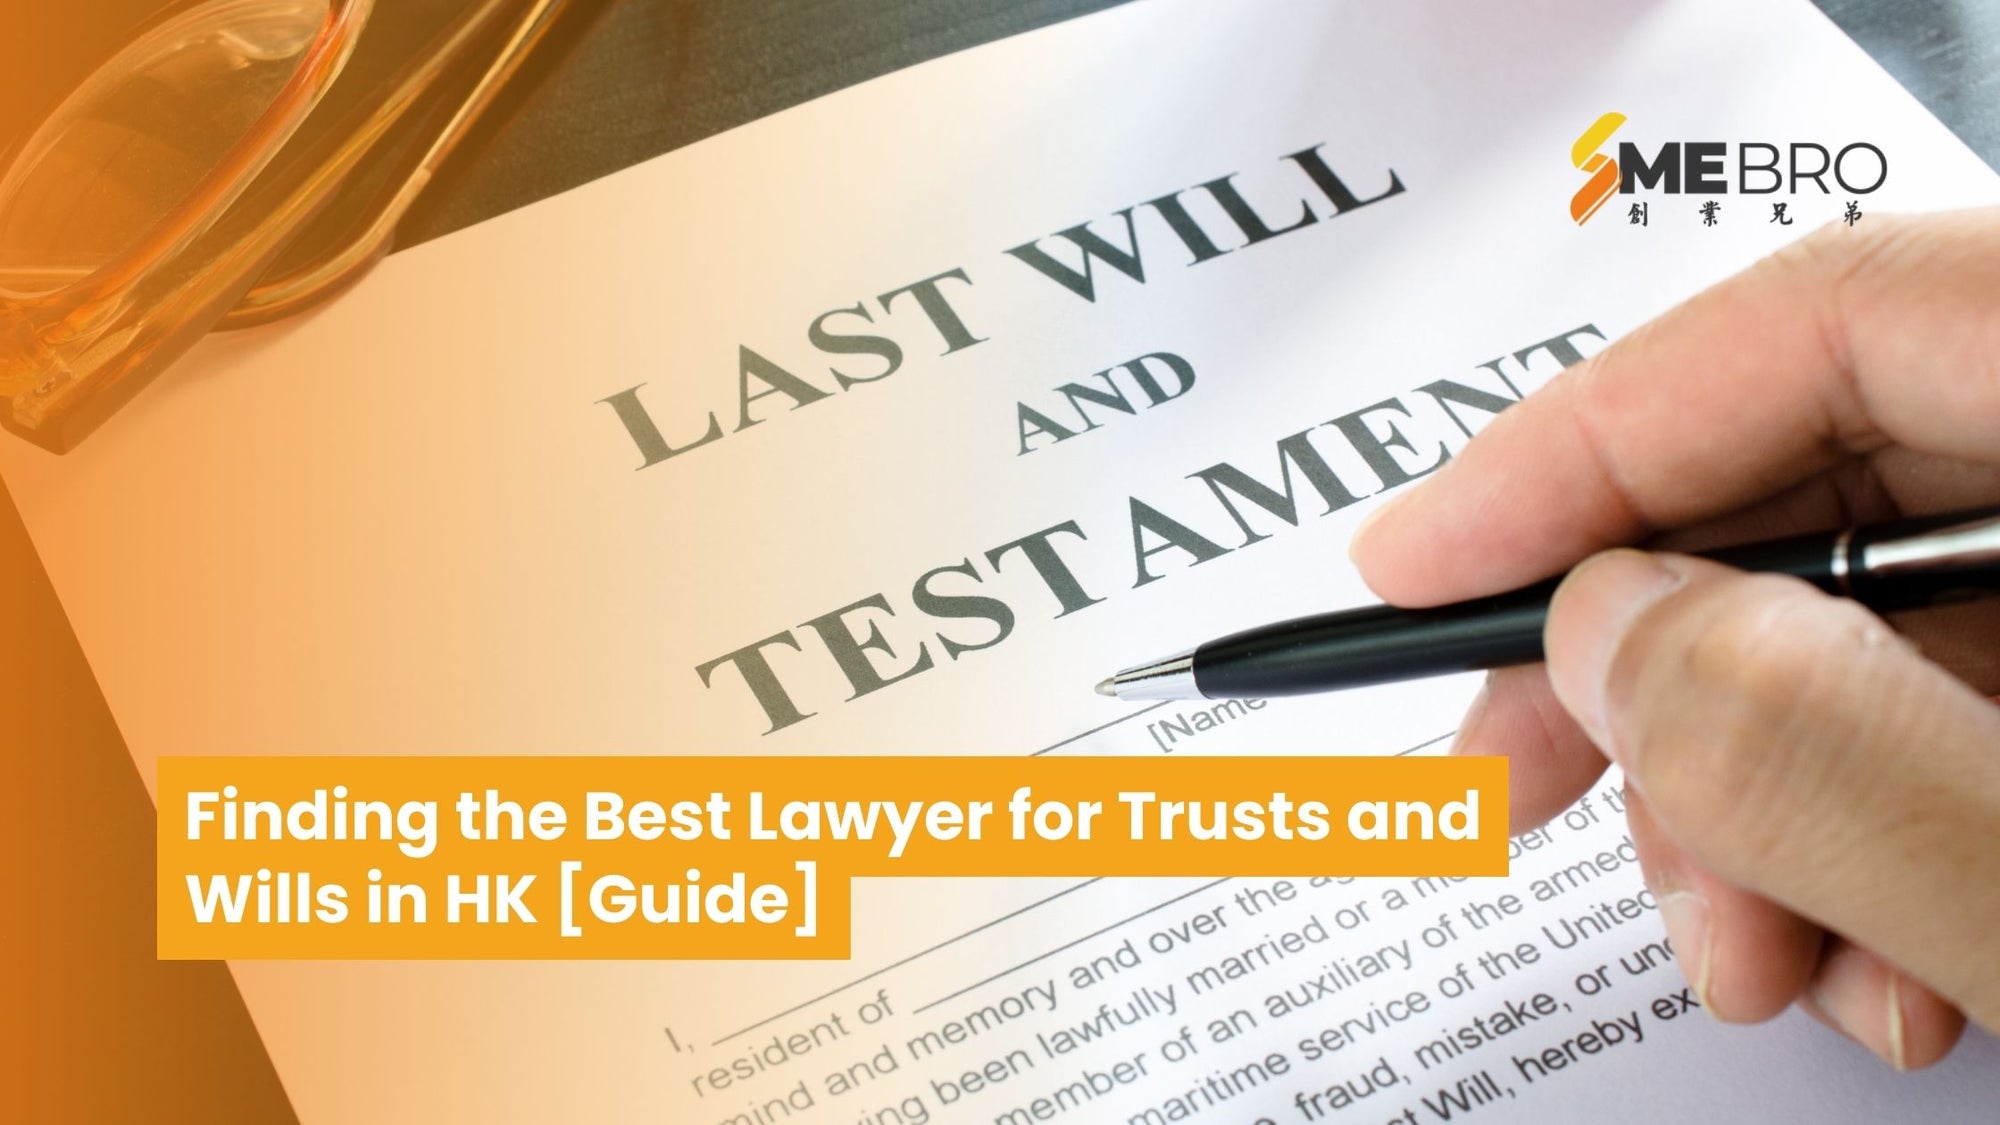 Finding The Best Lawyer for Trusts and Wills in HK [Guide]